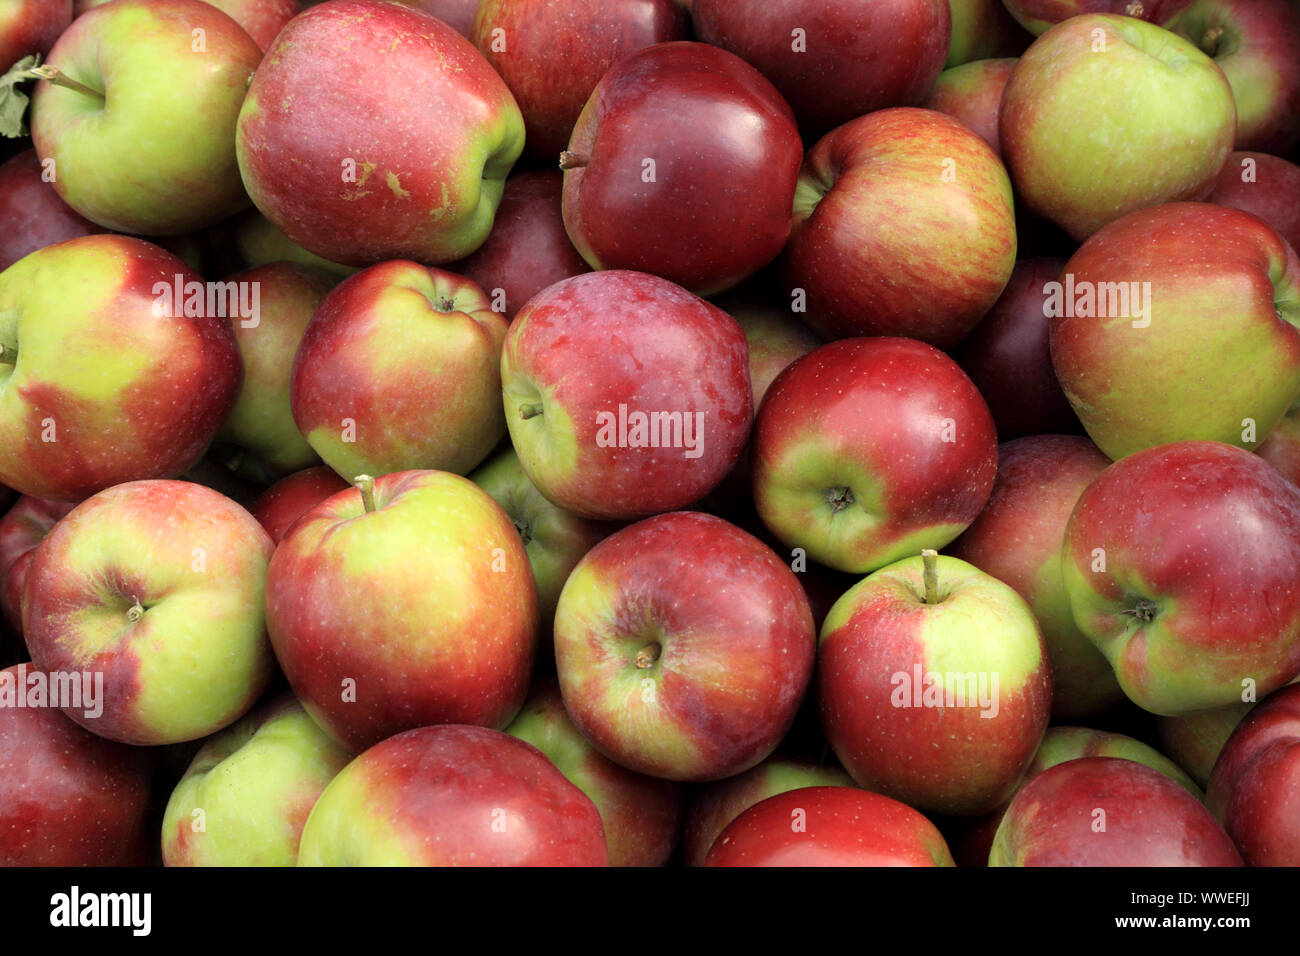 Apple 'Epicure', apples, eating apples, Malus Domestica, healthy eating Stock Photo